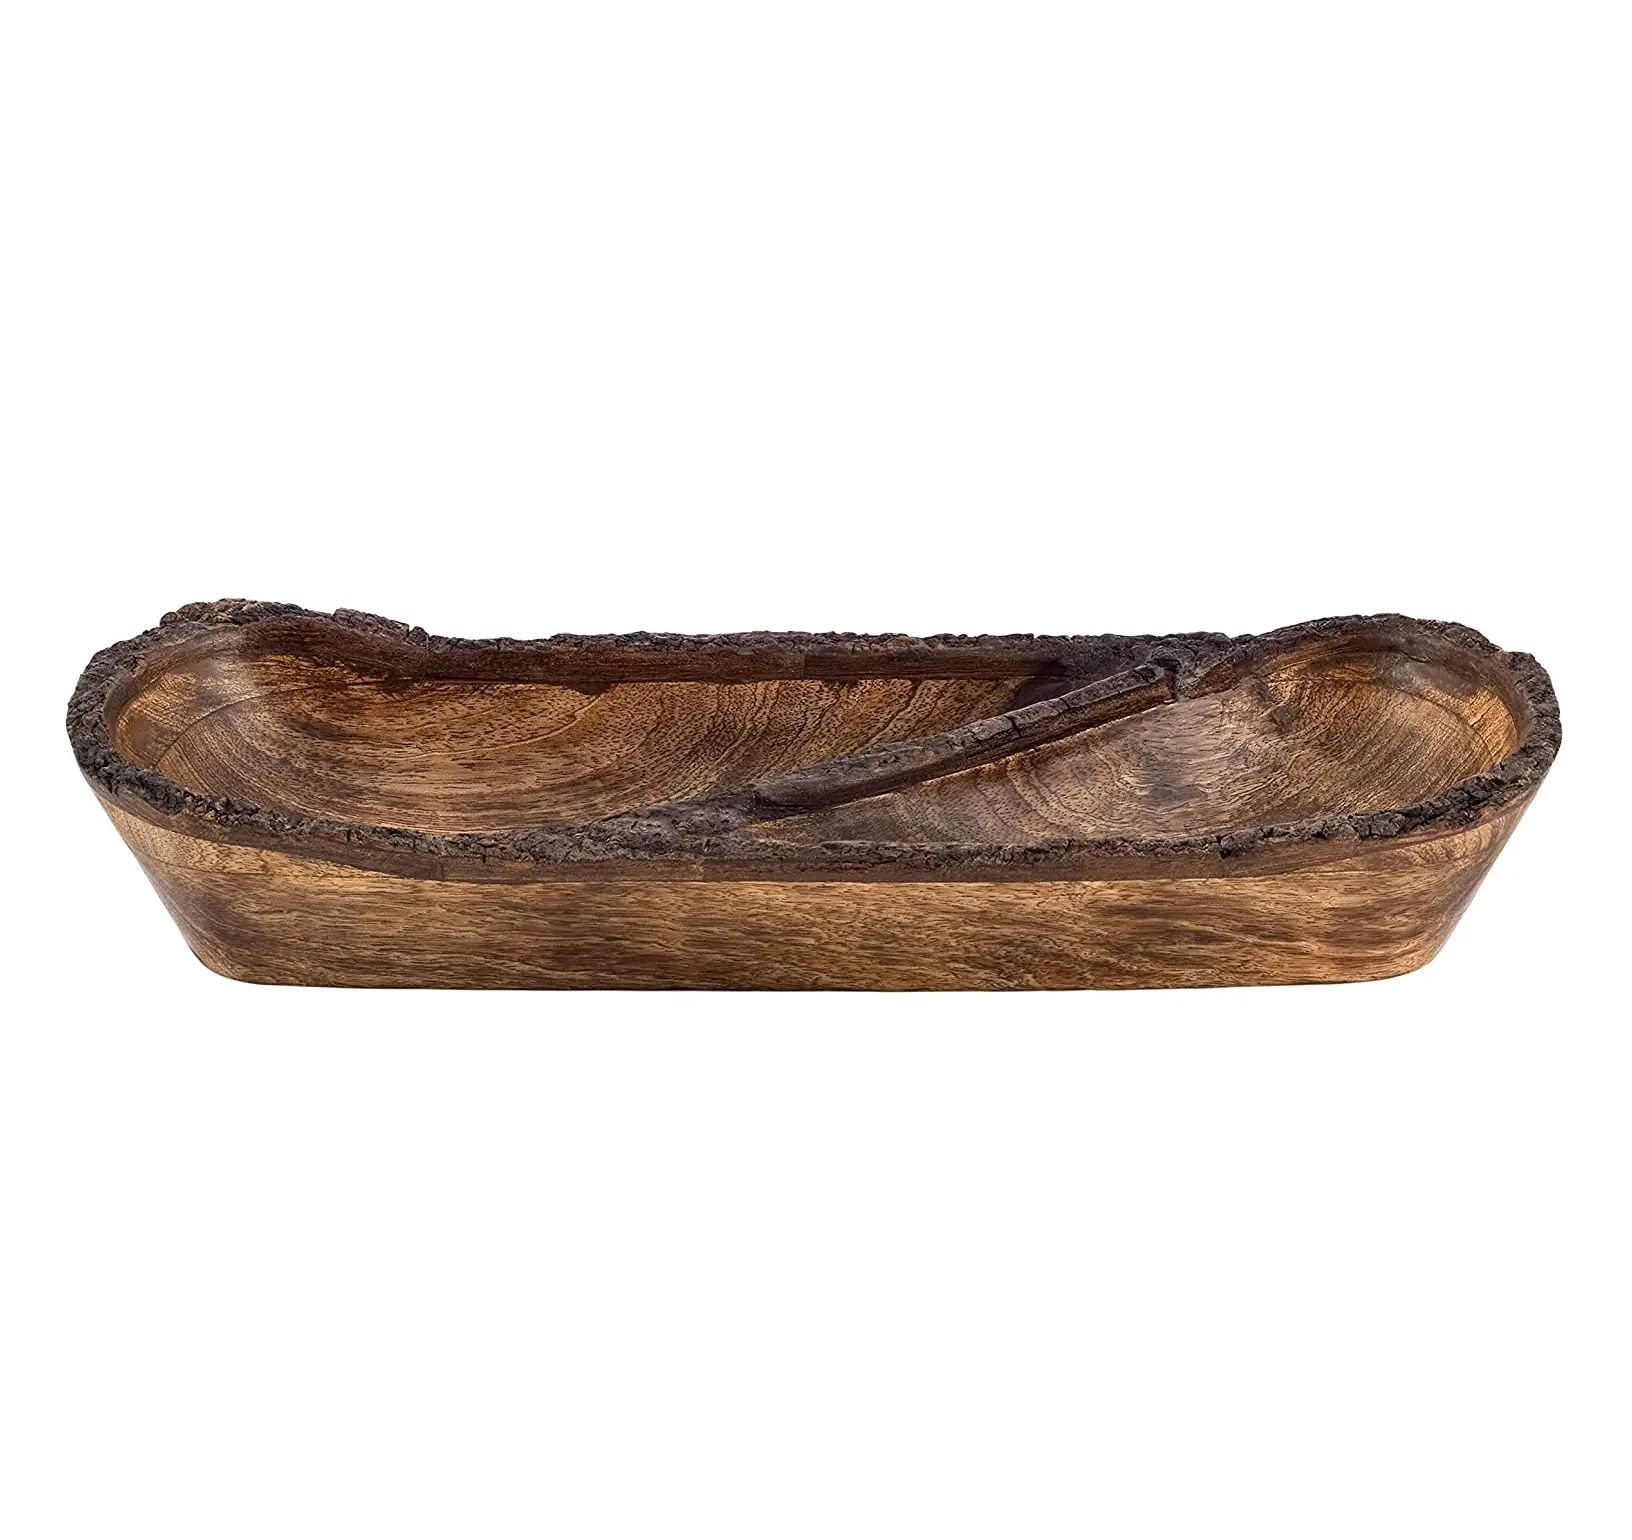 Natural Wooden Tray Serving Bowl for Salad Veggies and Fruits Large Deep Tray for Family Party (Bark Edge Divided Tray